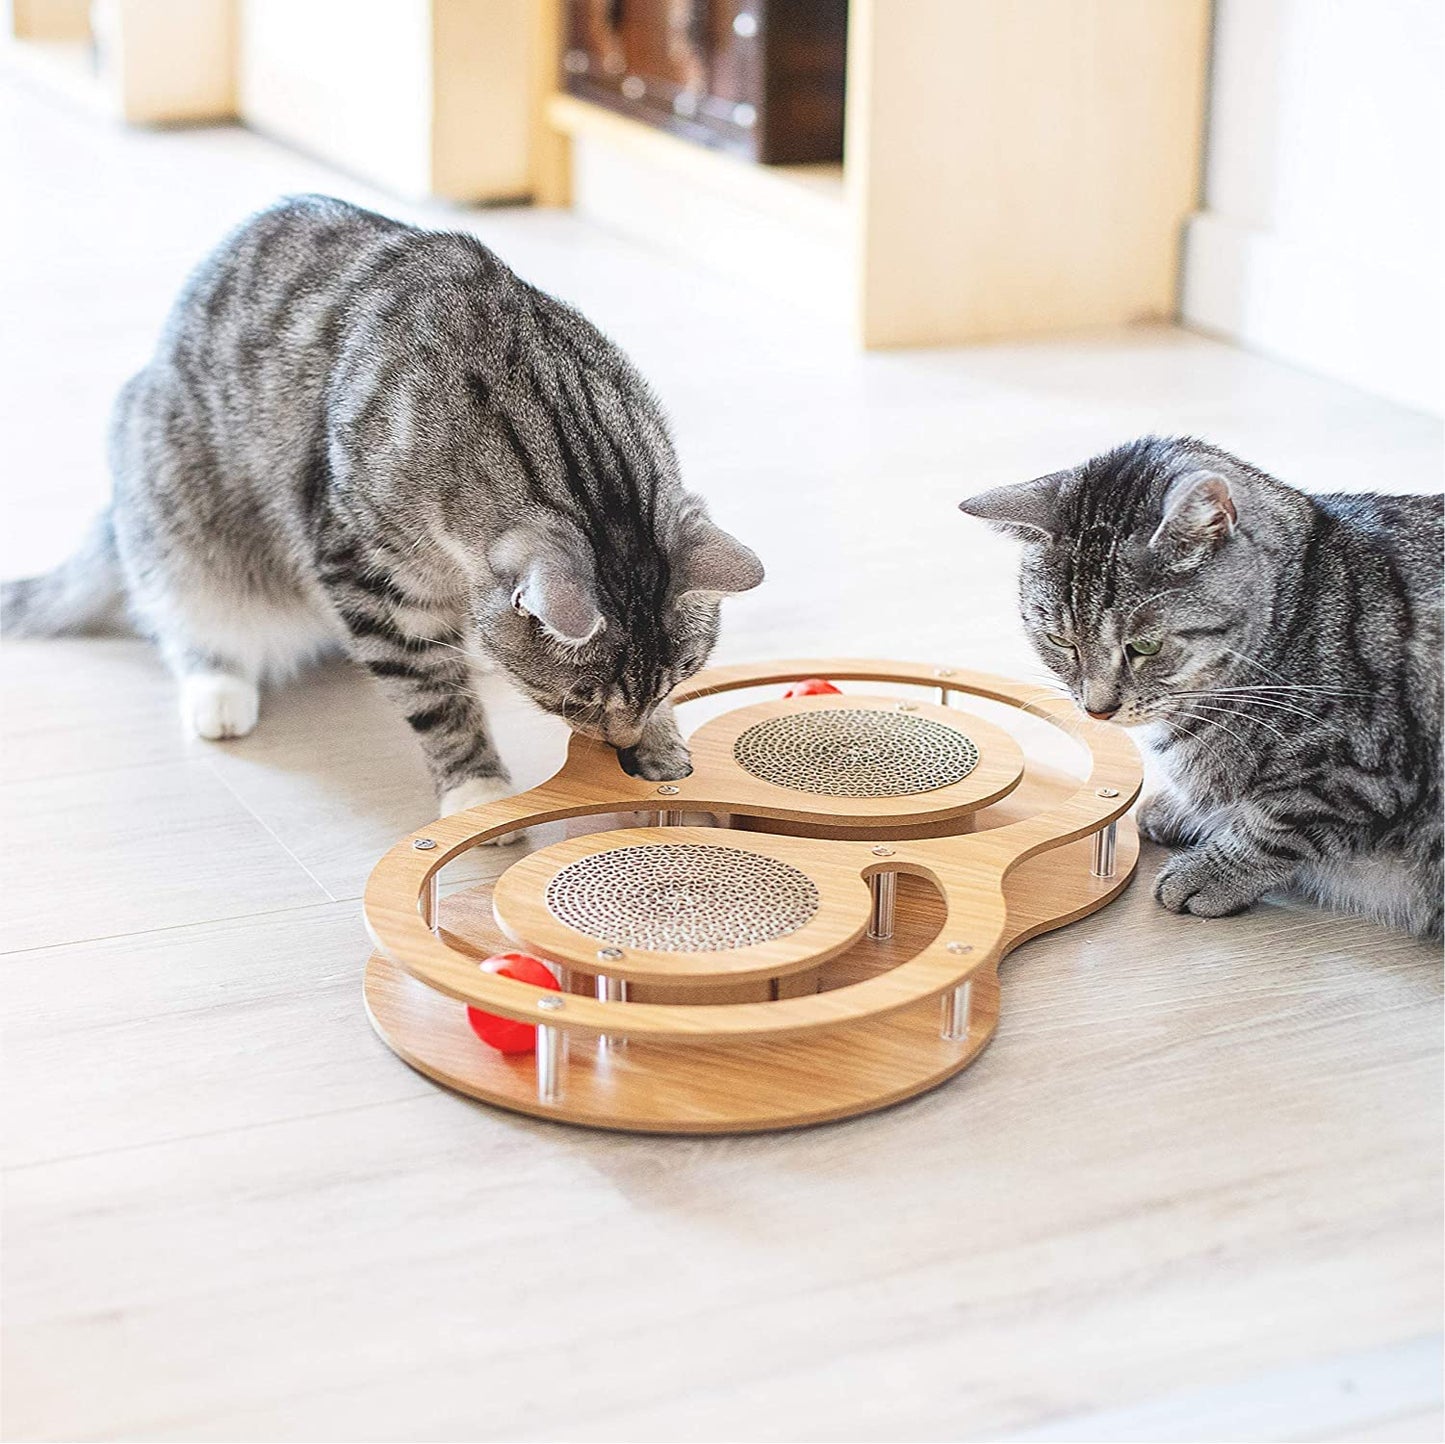 Cat Games and Scratching Posts - Cat Games for Adults and Kittens